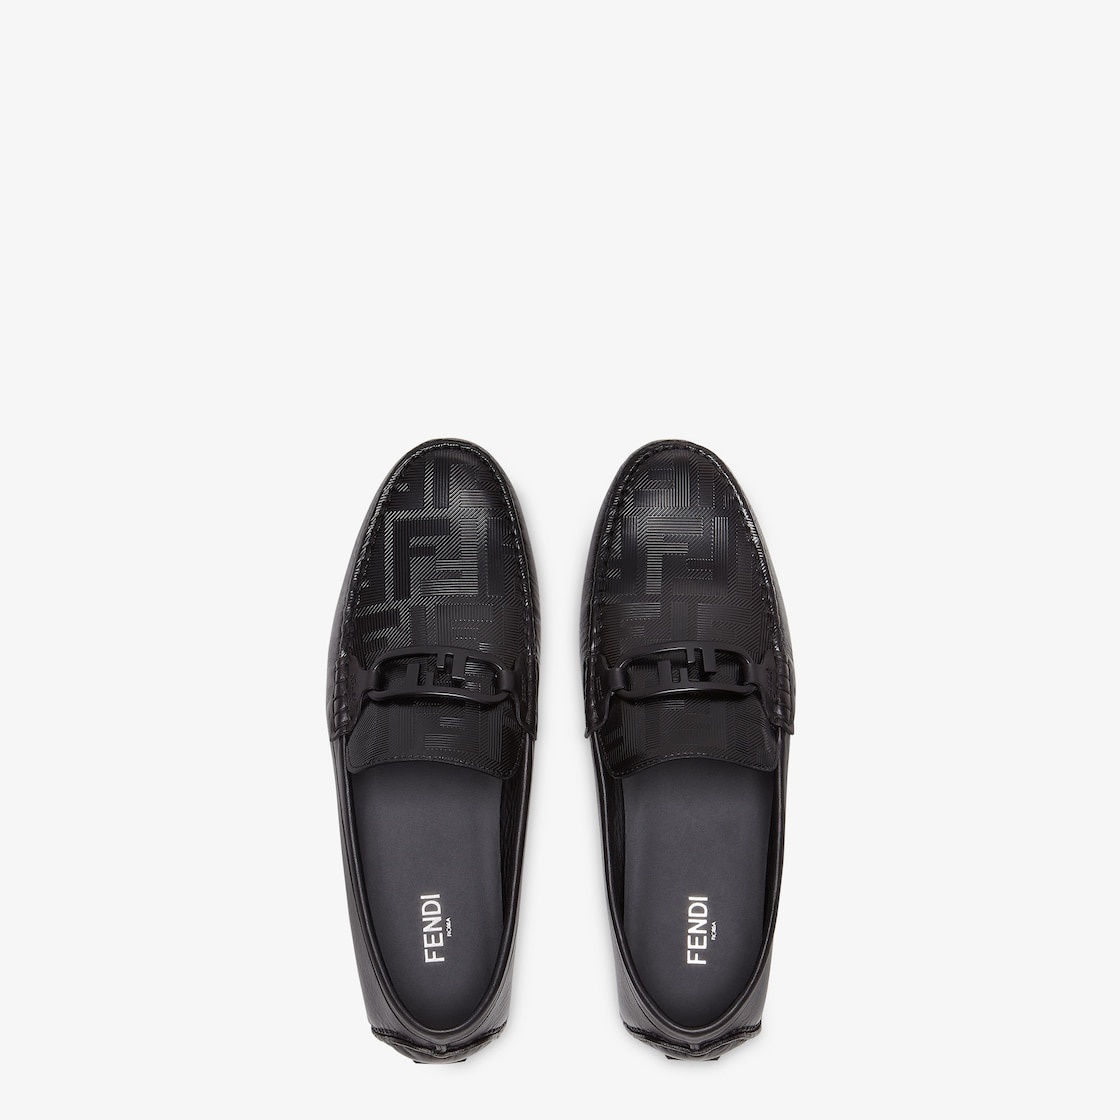 O’Lock driving loafers - 4